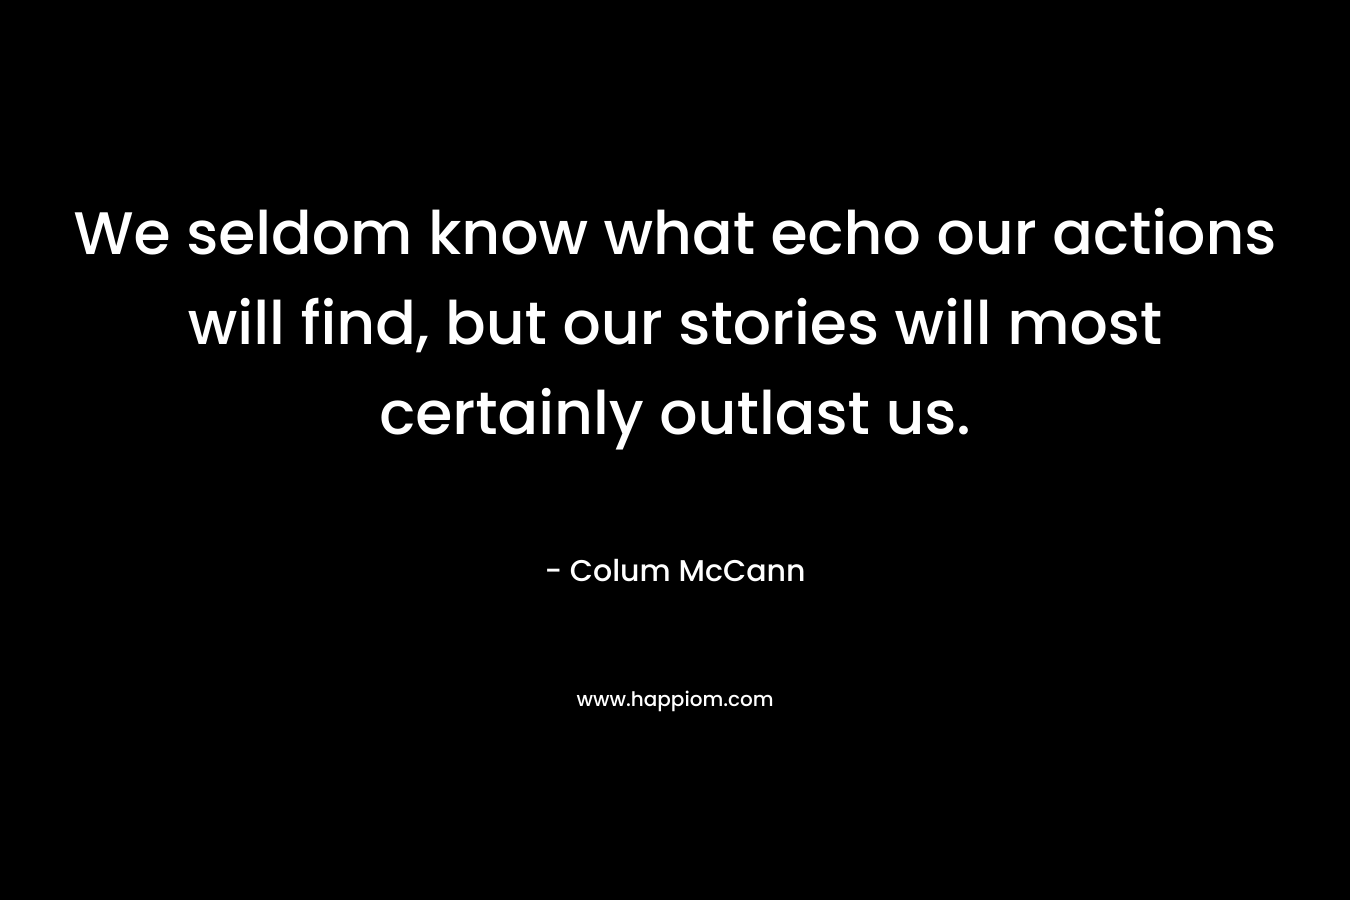 We seldom know what echo our actions will find, but our stories will most certainly outlast us.